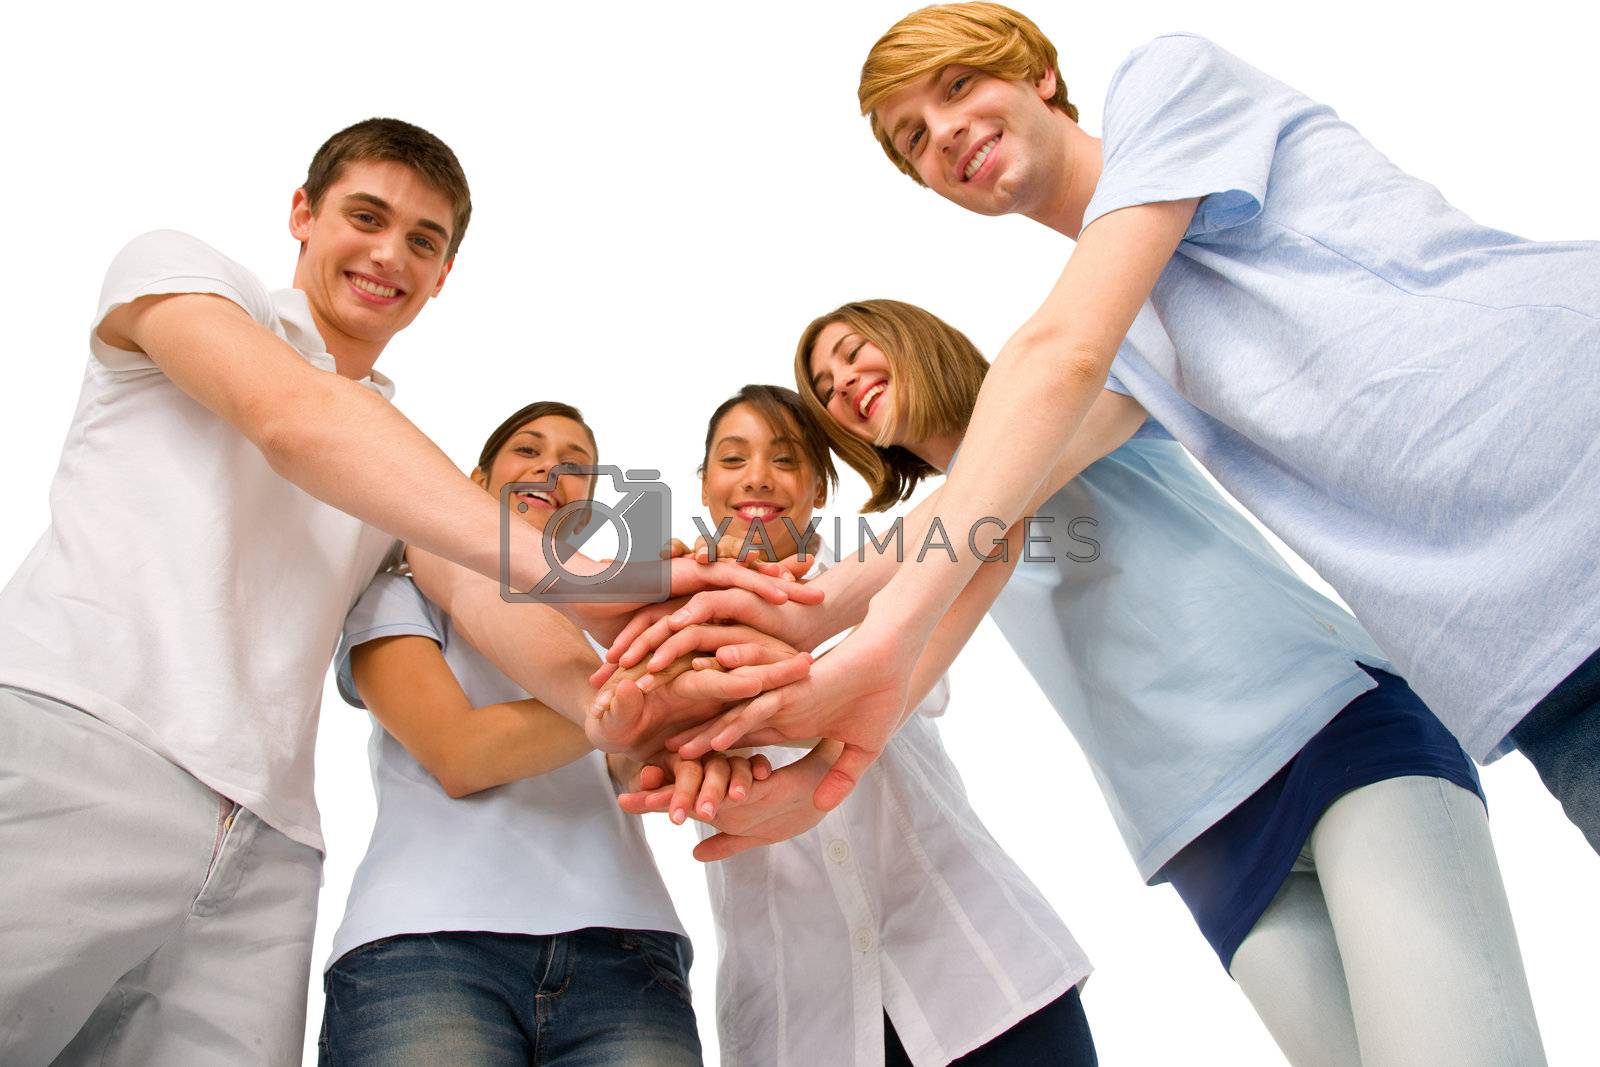 Royalty free image of teenagers with hands together by ambro